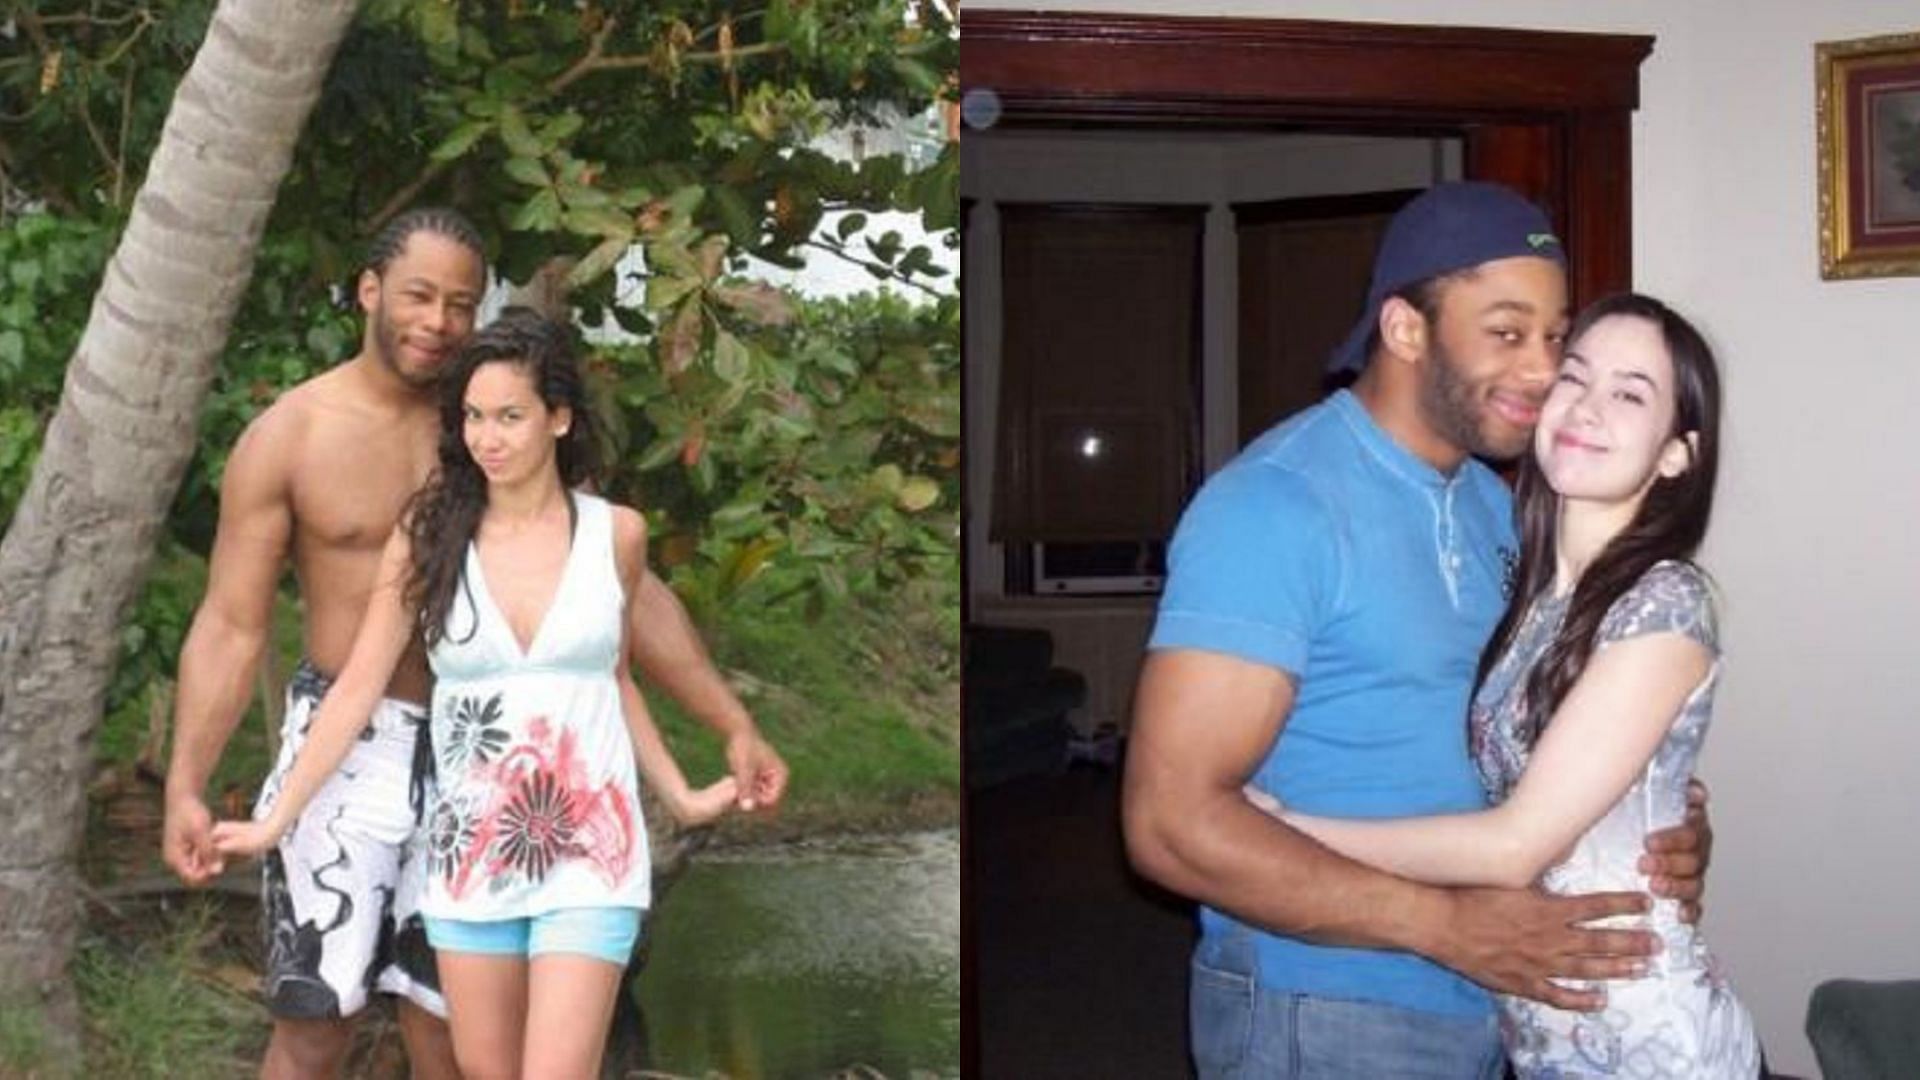 10 men/women former WWE Superstar AJ Lee has been romantically linked with  in real life